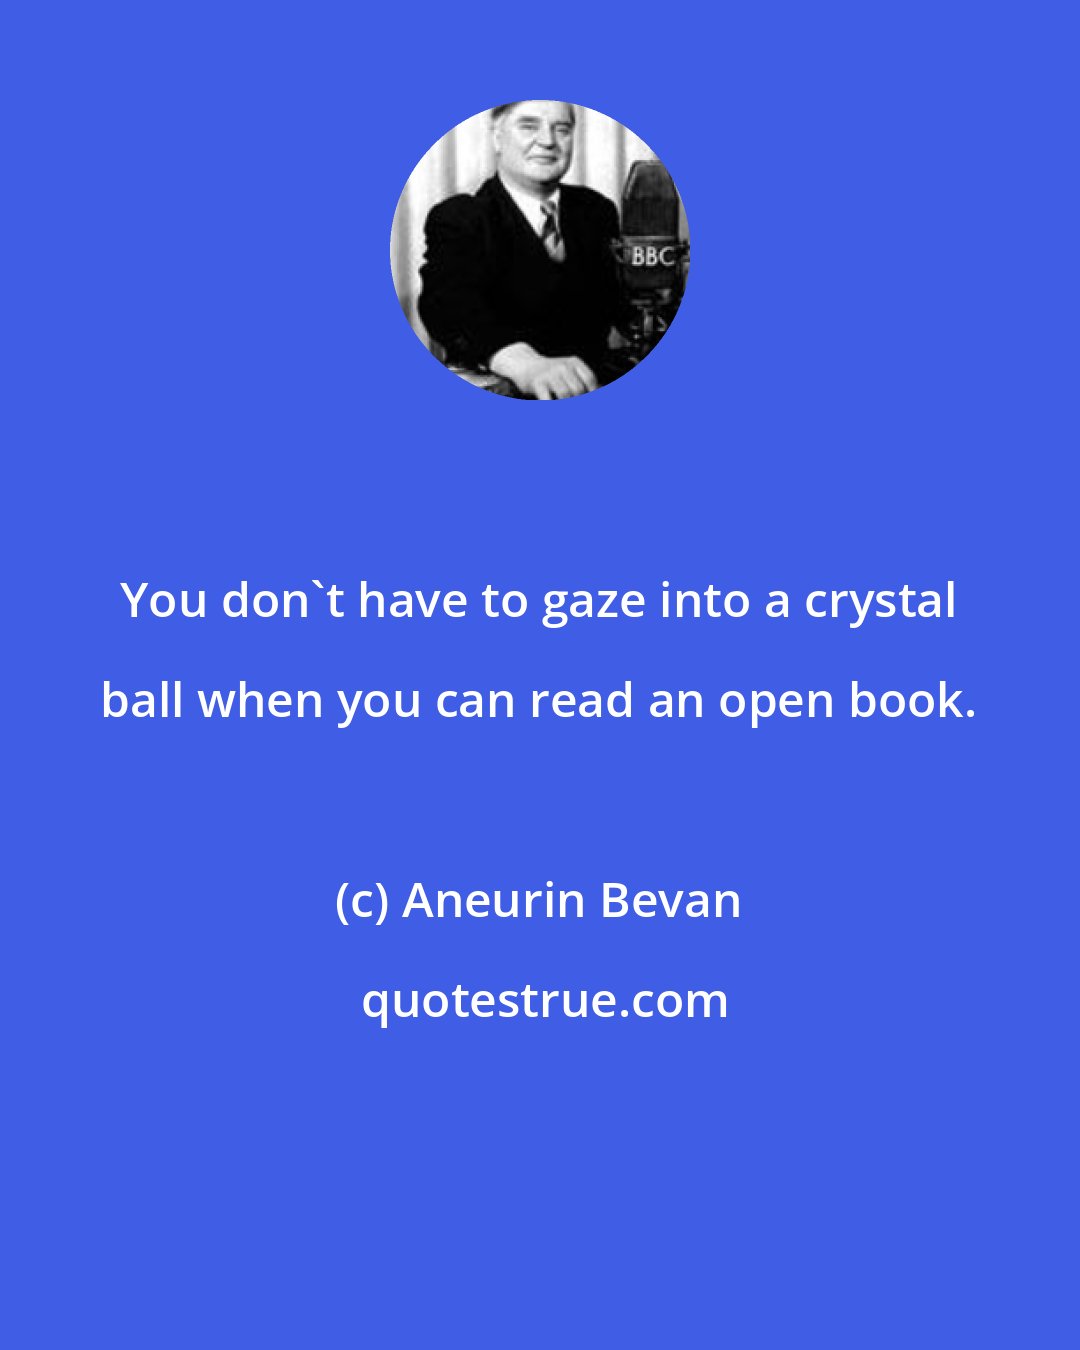 Aneurin Bevan: You don't have to gaze into a crystal ball when you can read an open book.